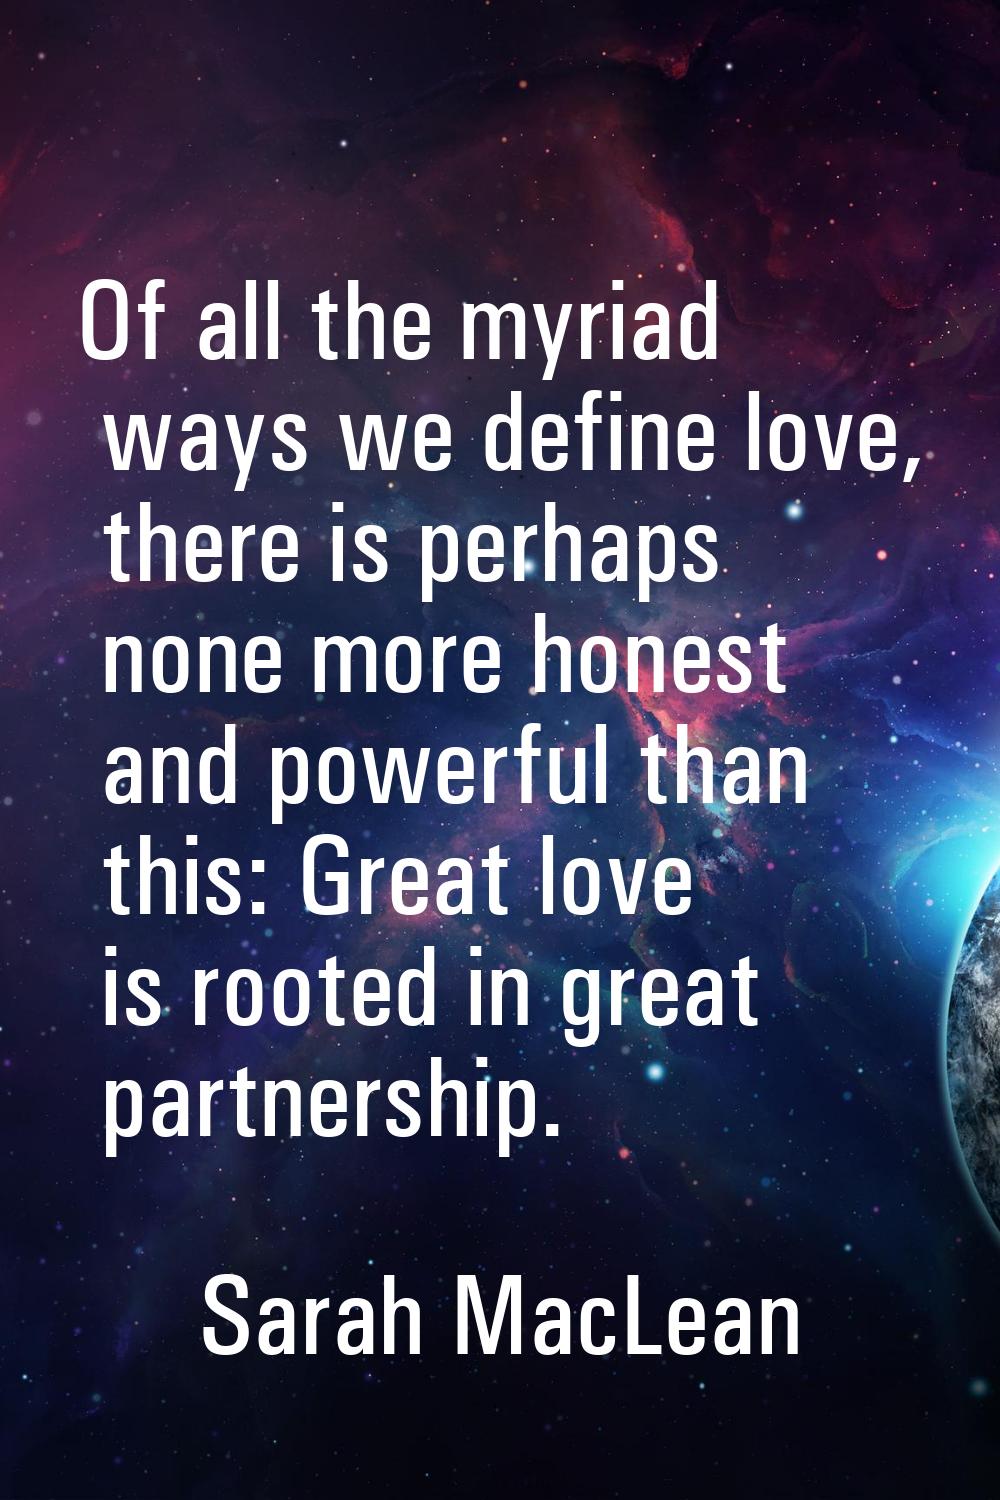 Of all the myriad ways we define love, there is perhaps none more honest and powerful than this: Gr